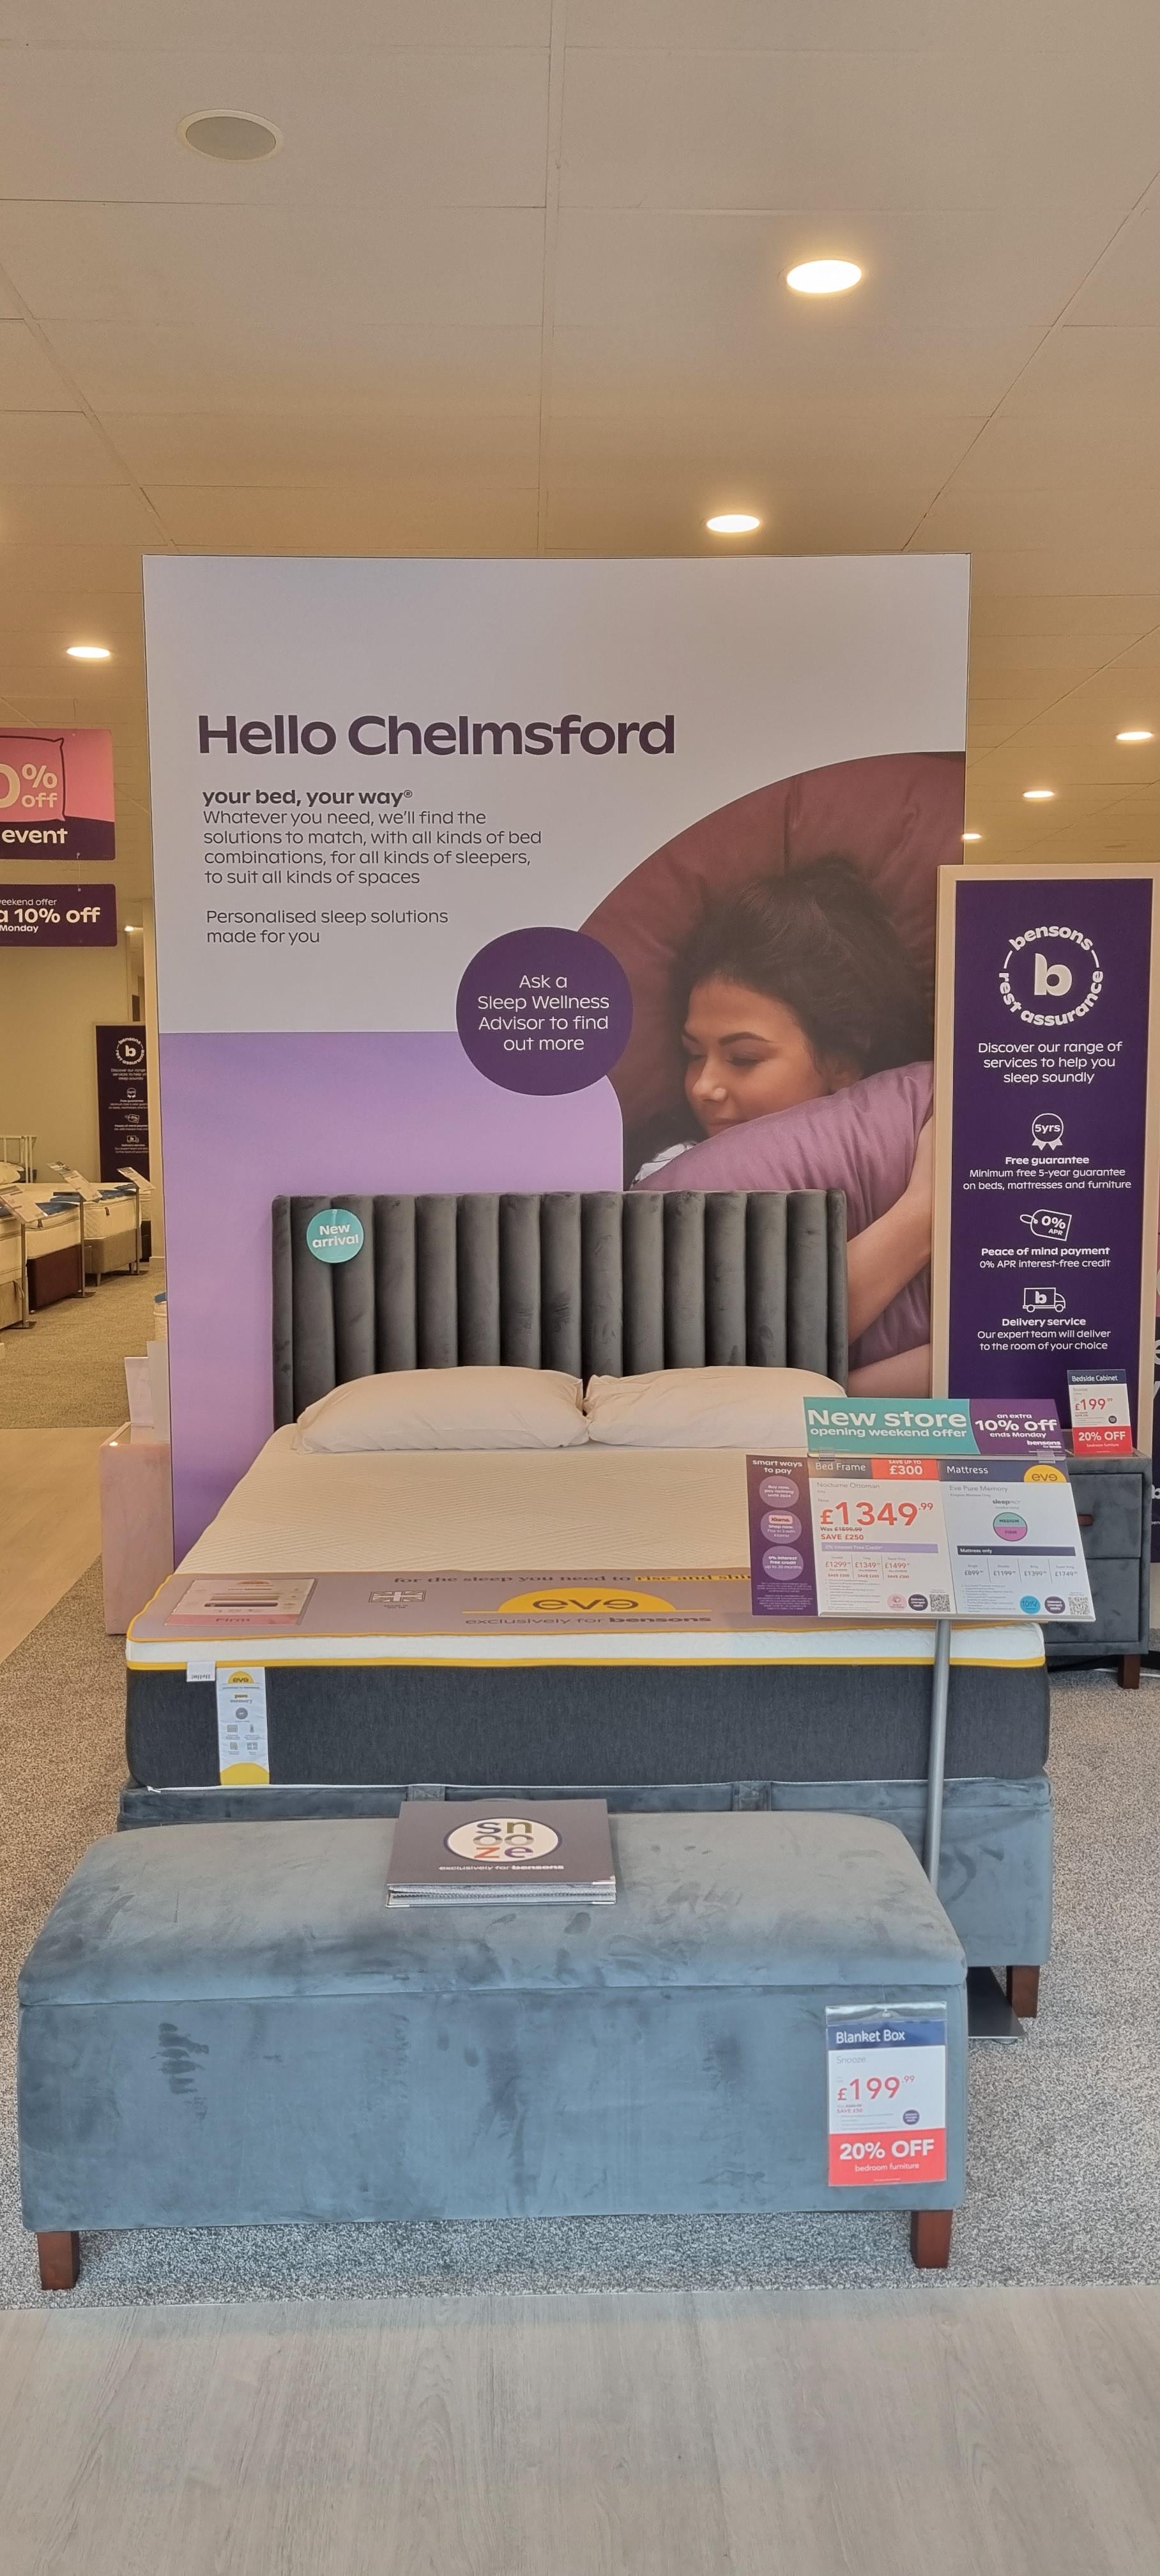 Images Bensons for Beds Chelmsford